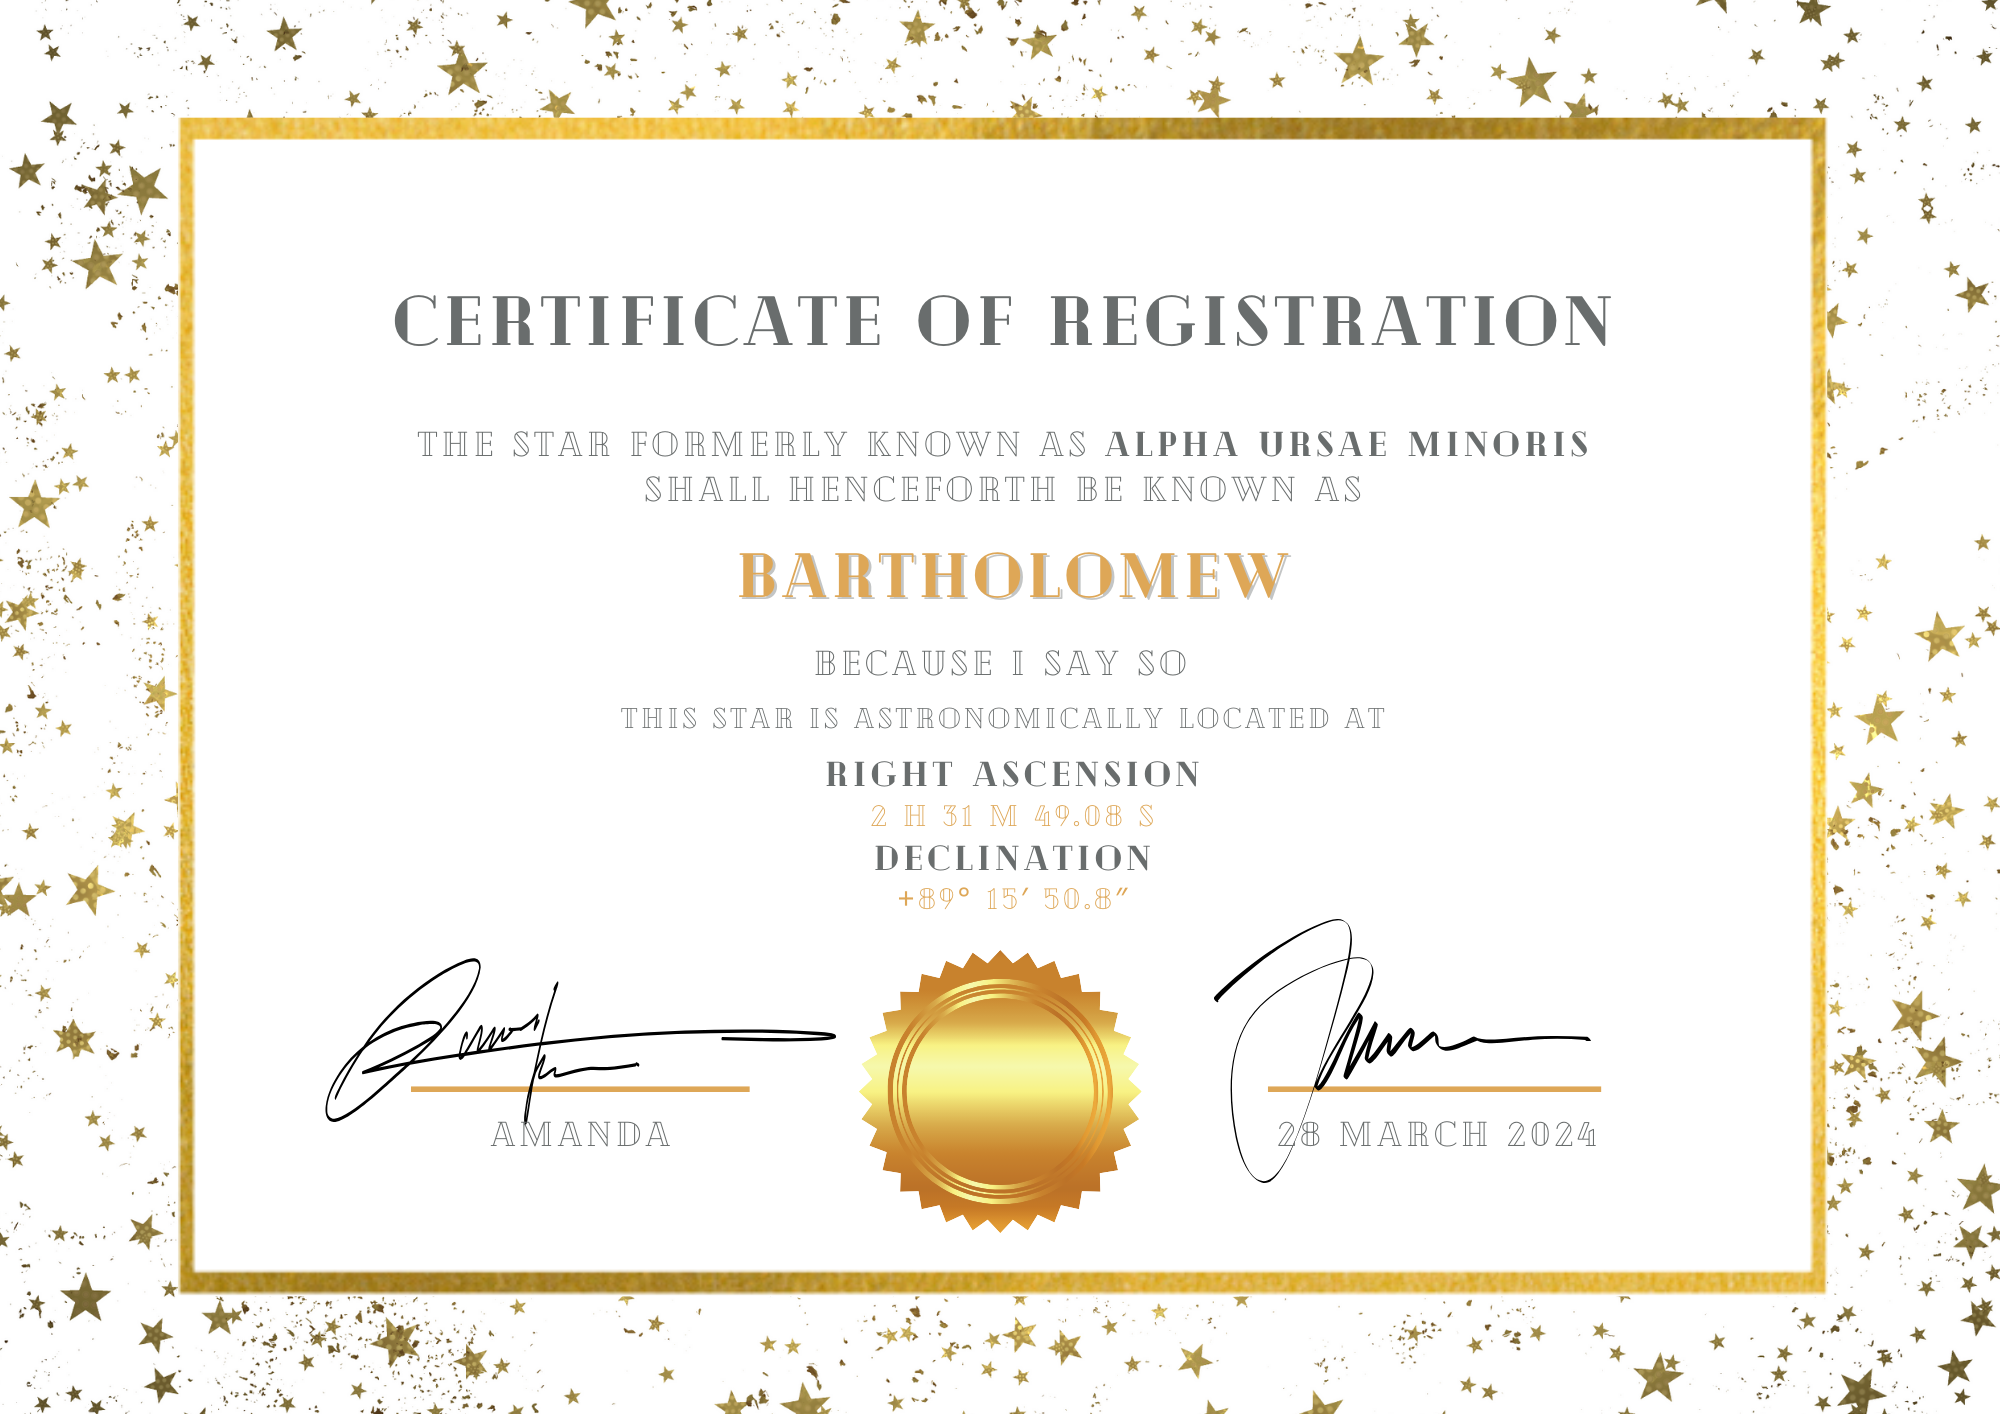 A certificate of registration renaming the North Star to Bartholomew.